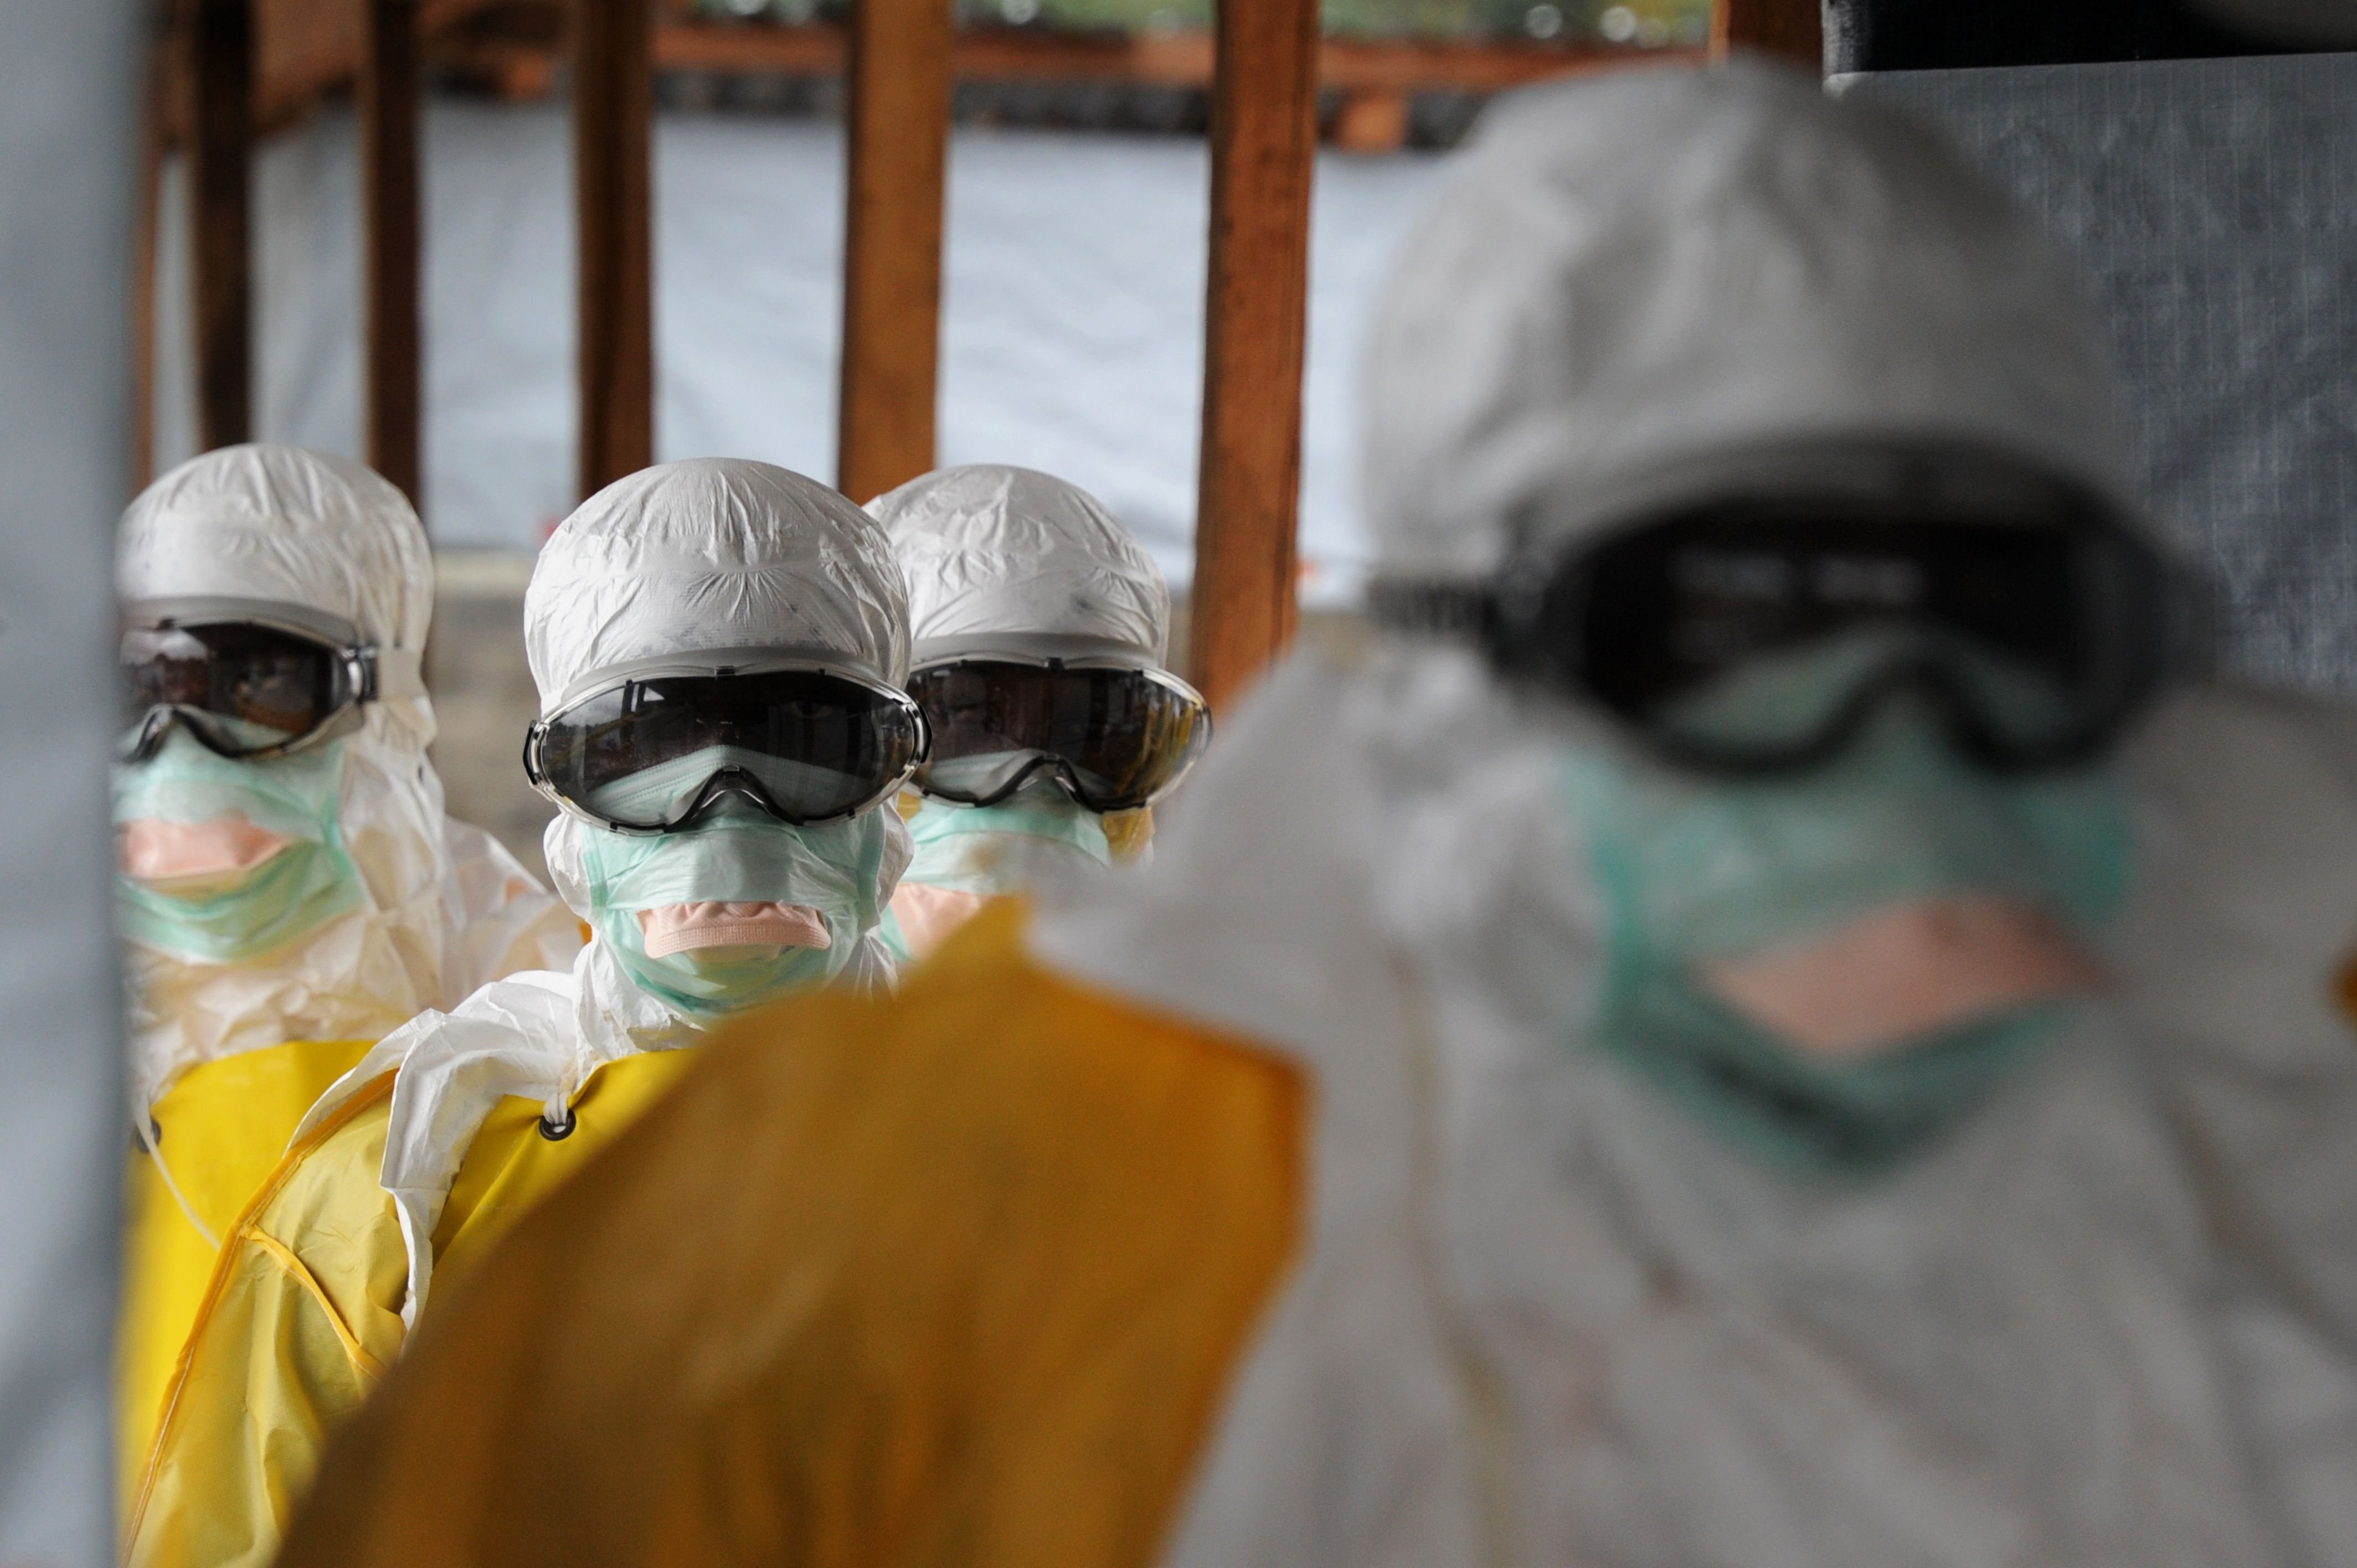 Health care workers, wearing protective suits, leave a high-risk area at the French NGO Medecins Sans Frontieres (Doctors without borders) Elwa hospital in Monrovia, Liberia on Aug. 30, 2014. (Dominique Faget—AFP/Getty Images)